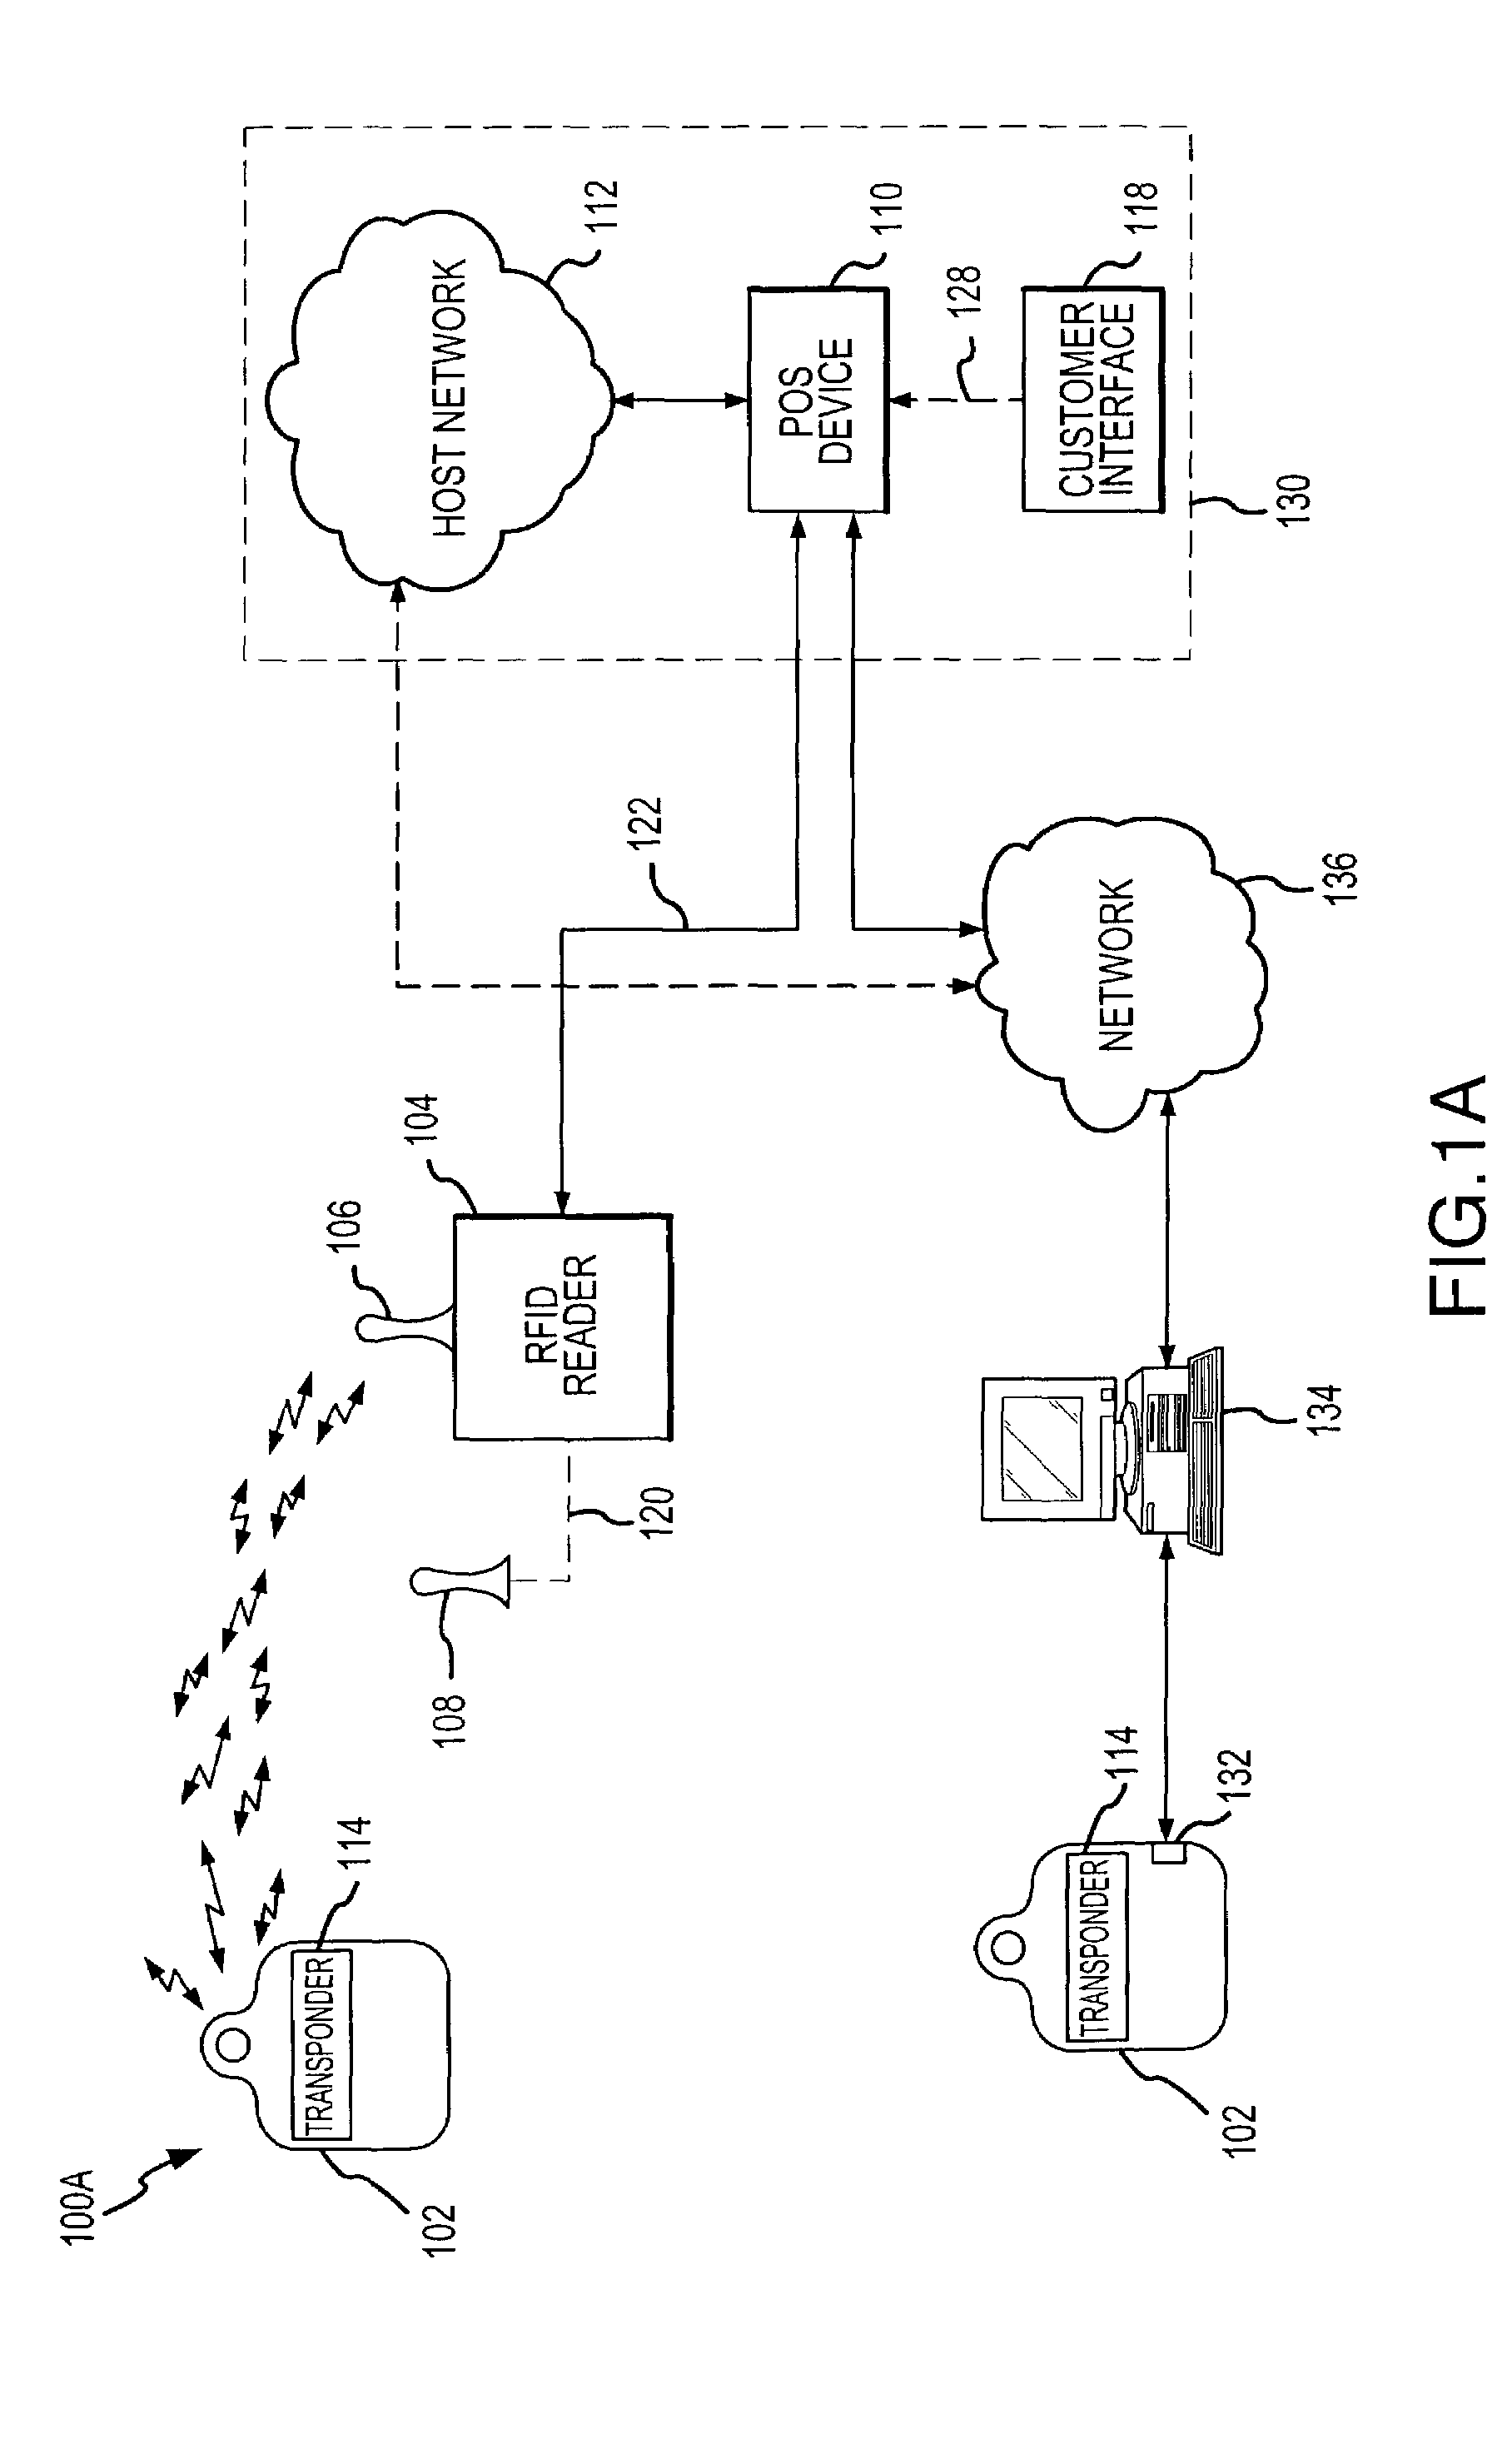 System and method for payment using radio frequency identification in contact and contactless transactions